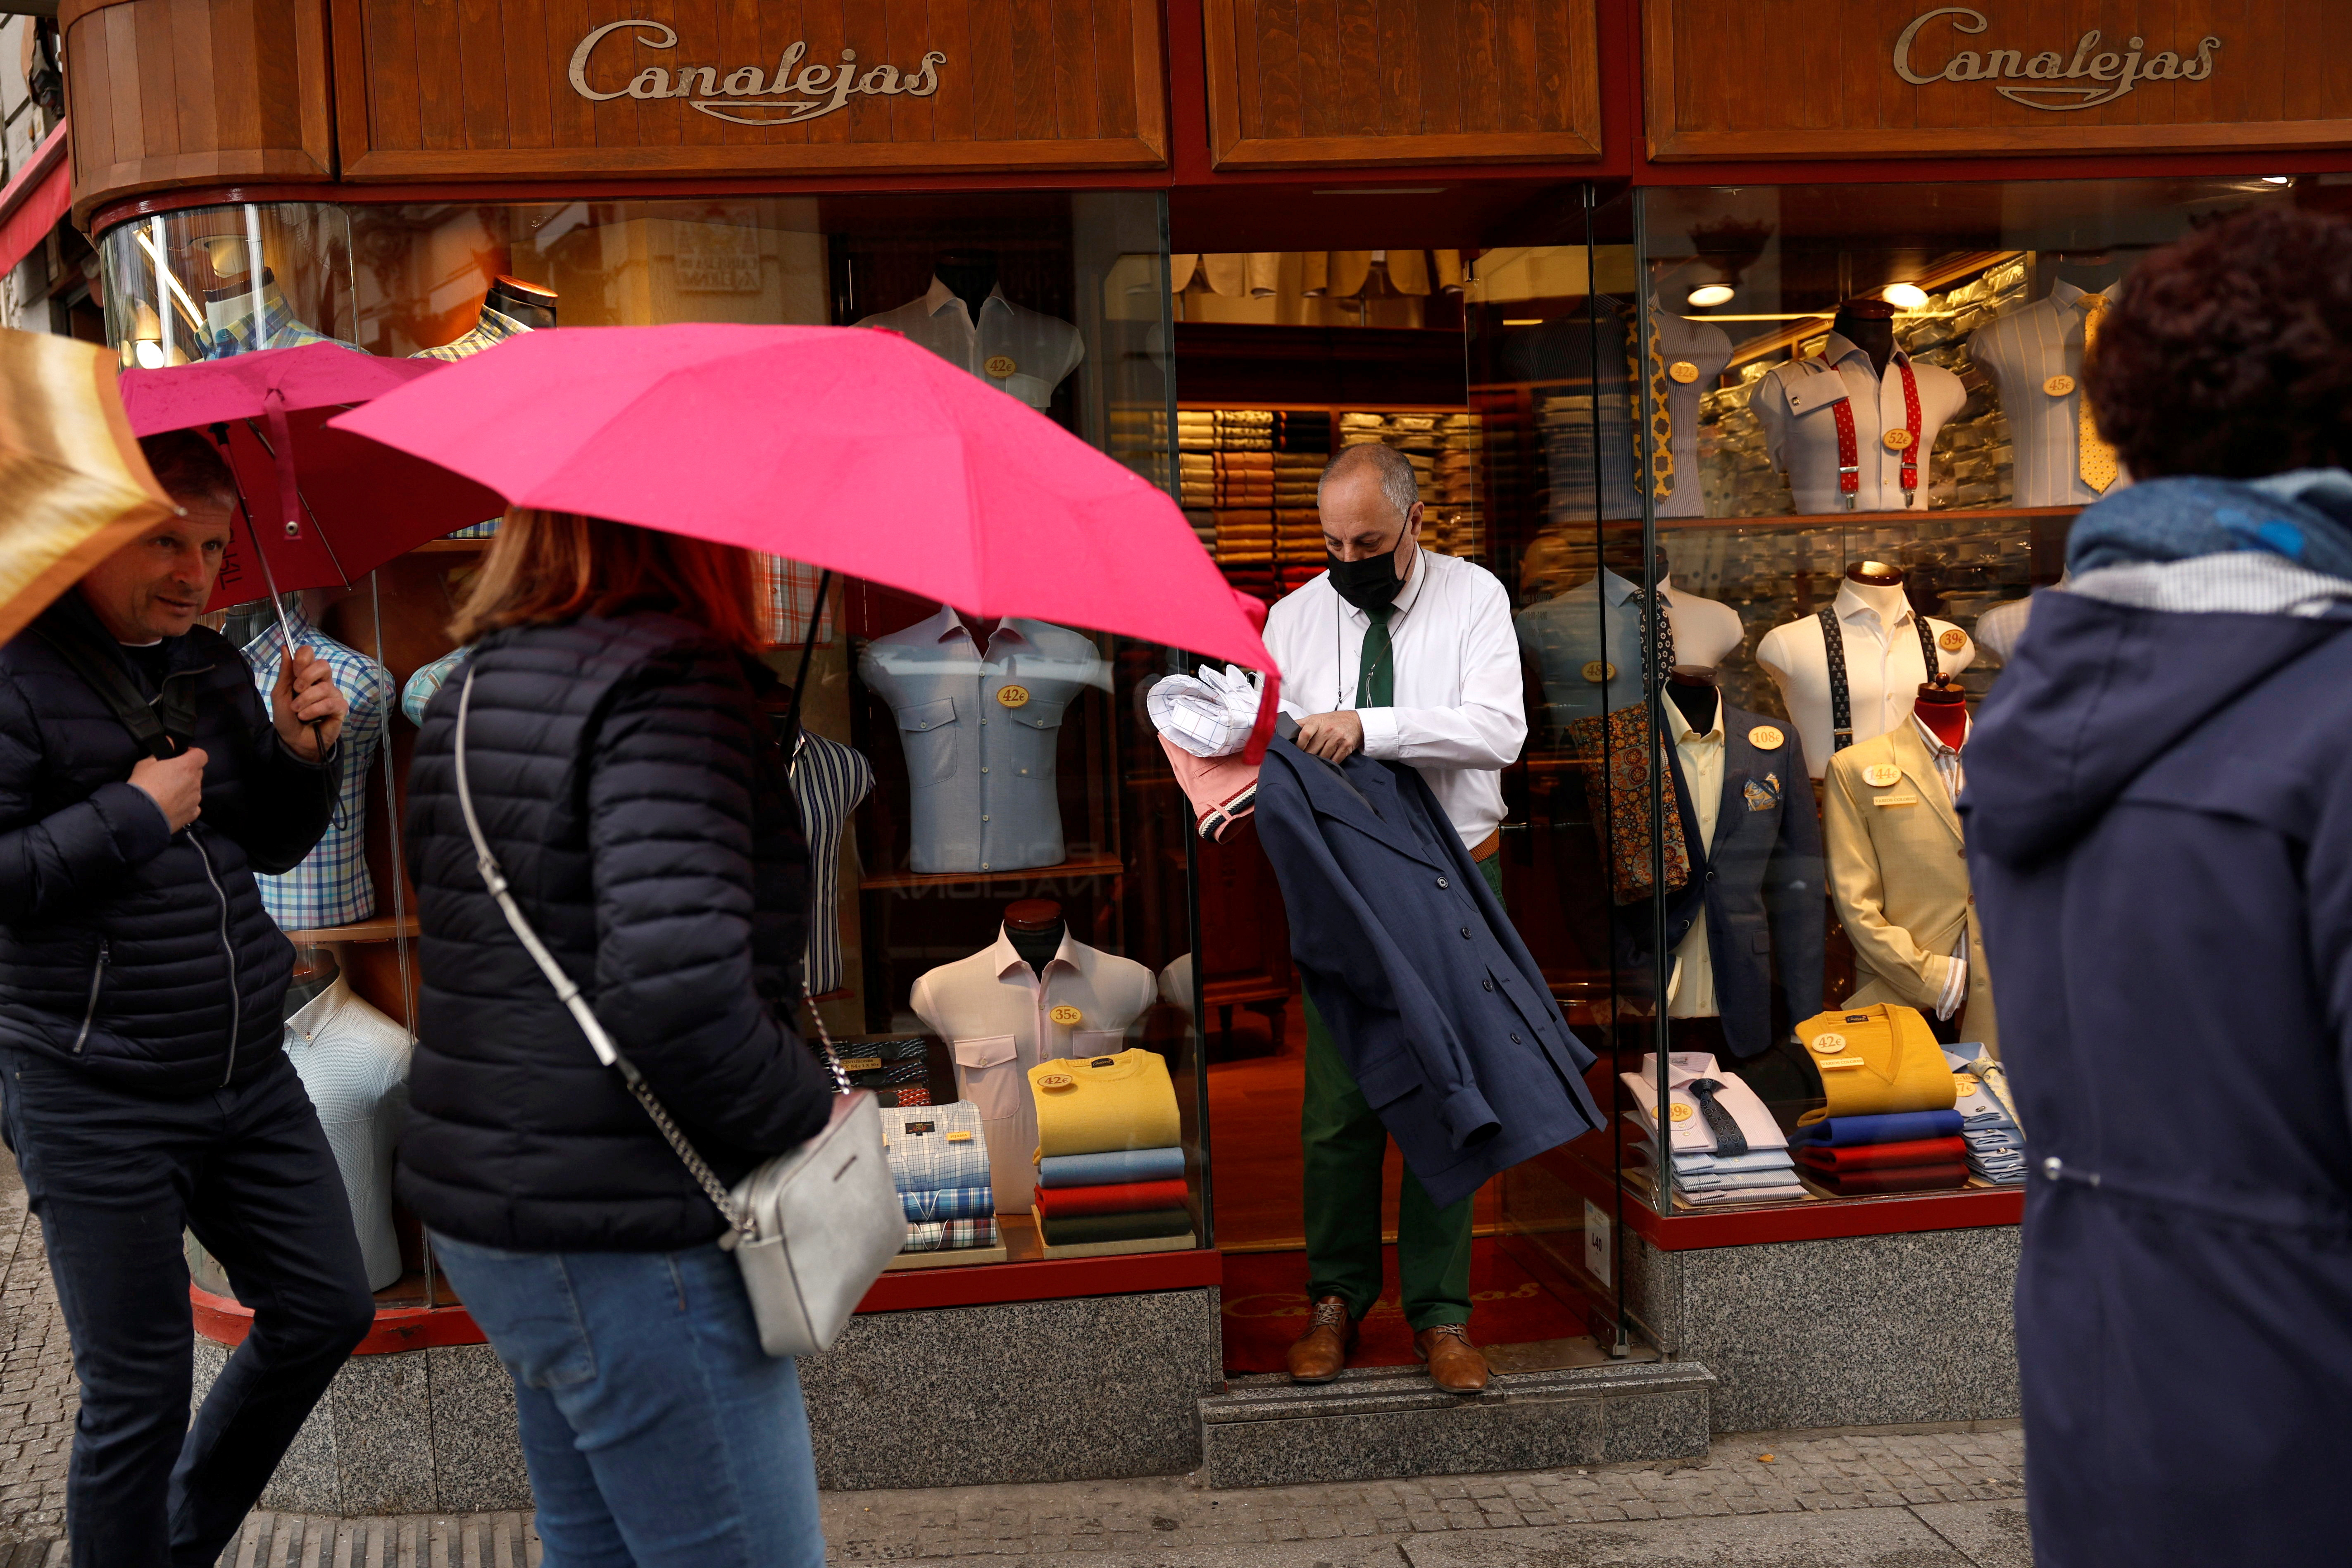 A shirt maker holds clothes at the entrance to a shirt and clothing store in central Madrid